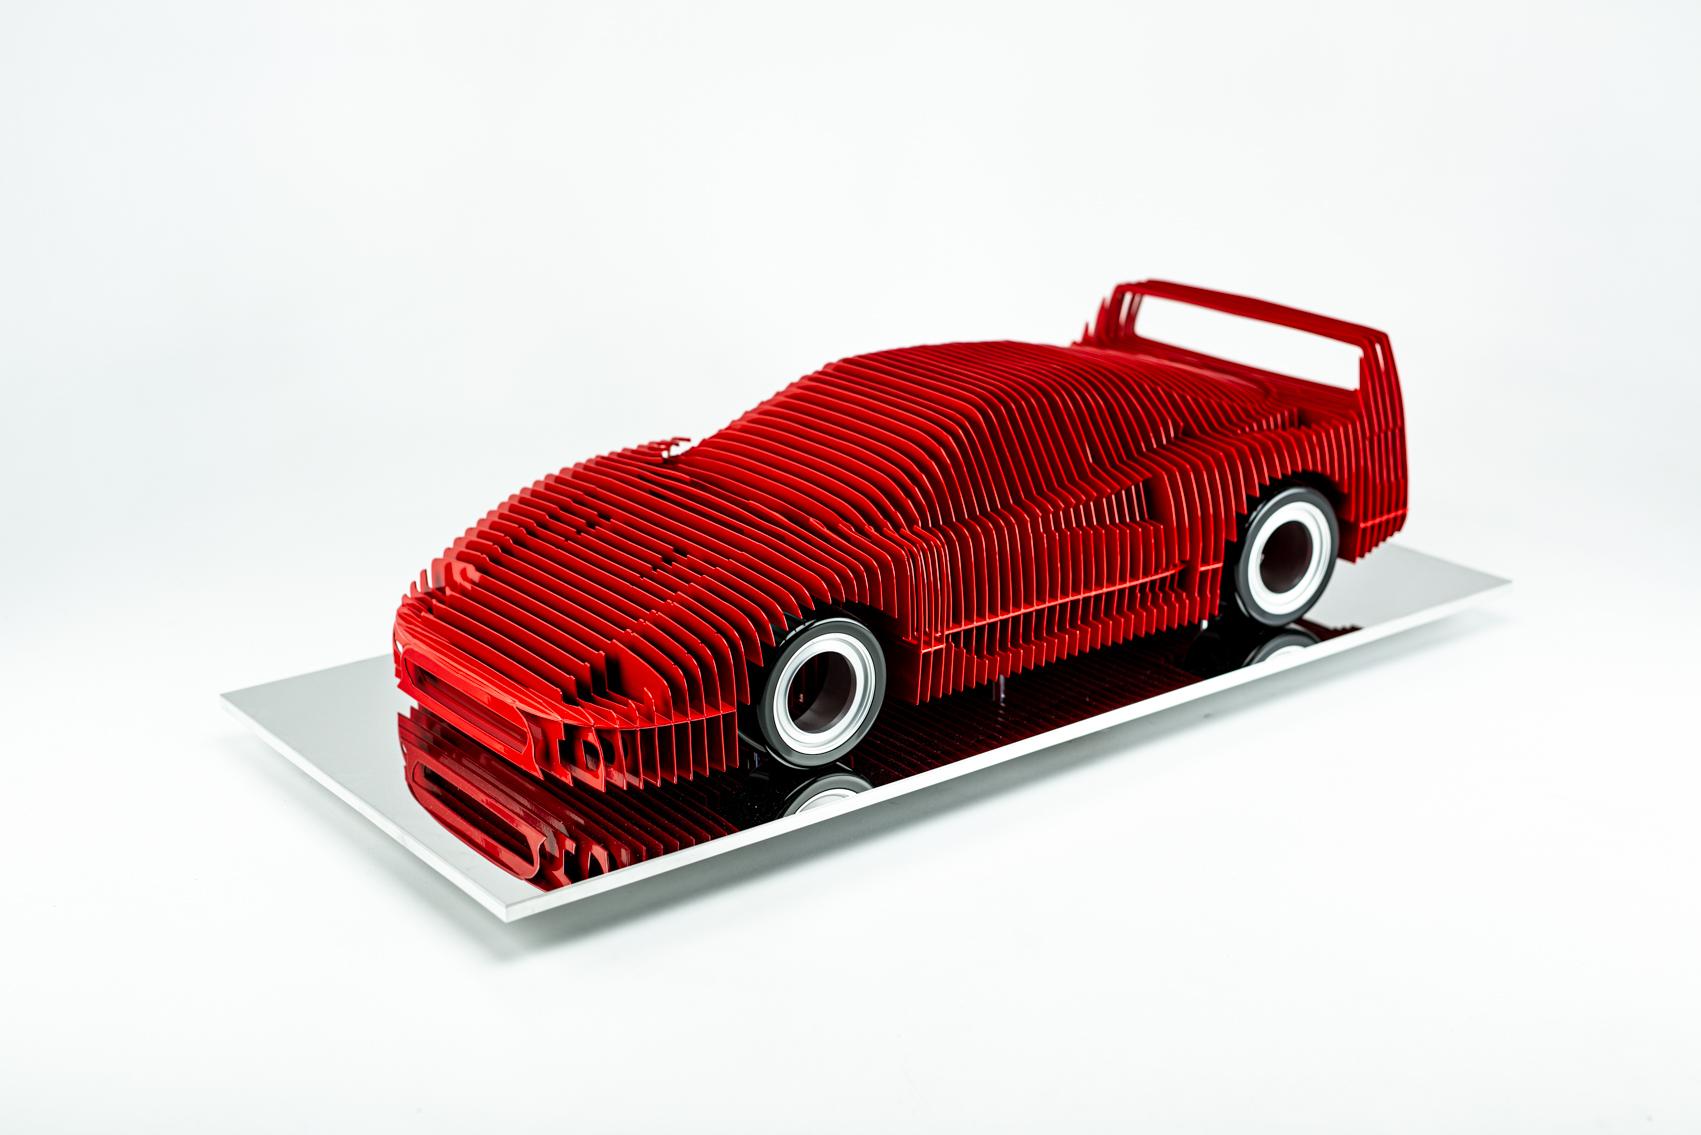 Ferrari F40 - Edition of 8 only - 80 cm - Sculpture by Antoine Dufilho